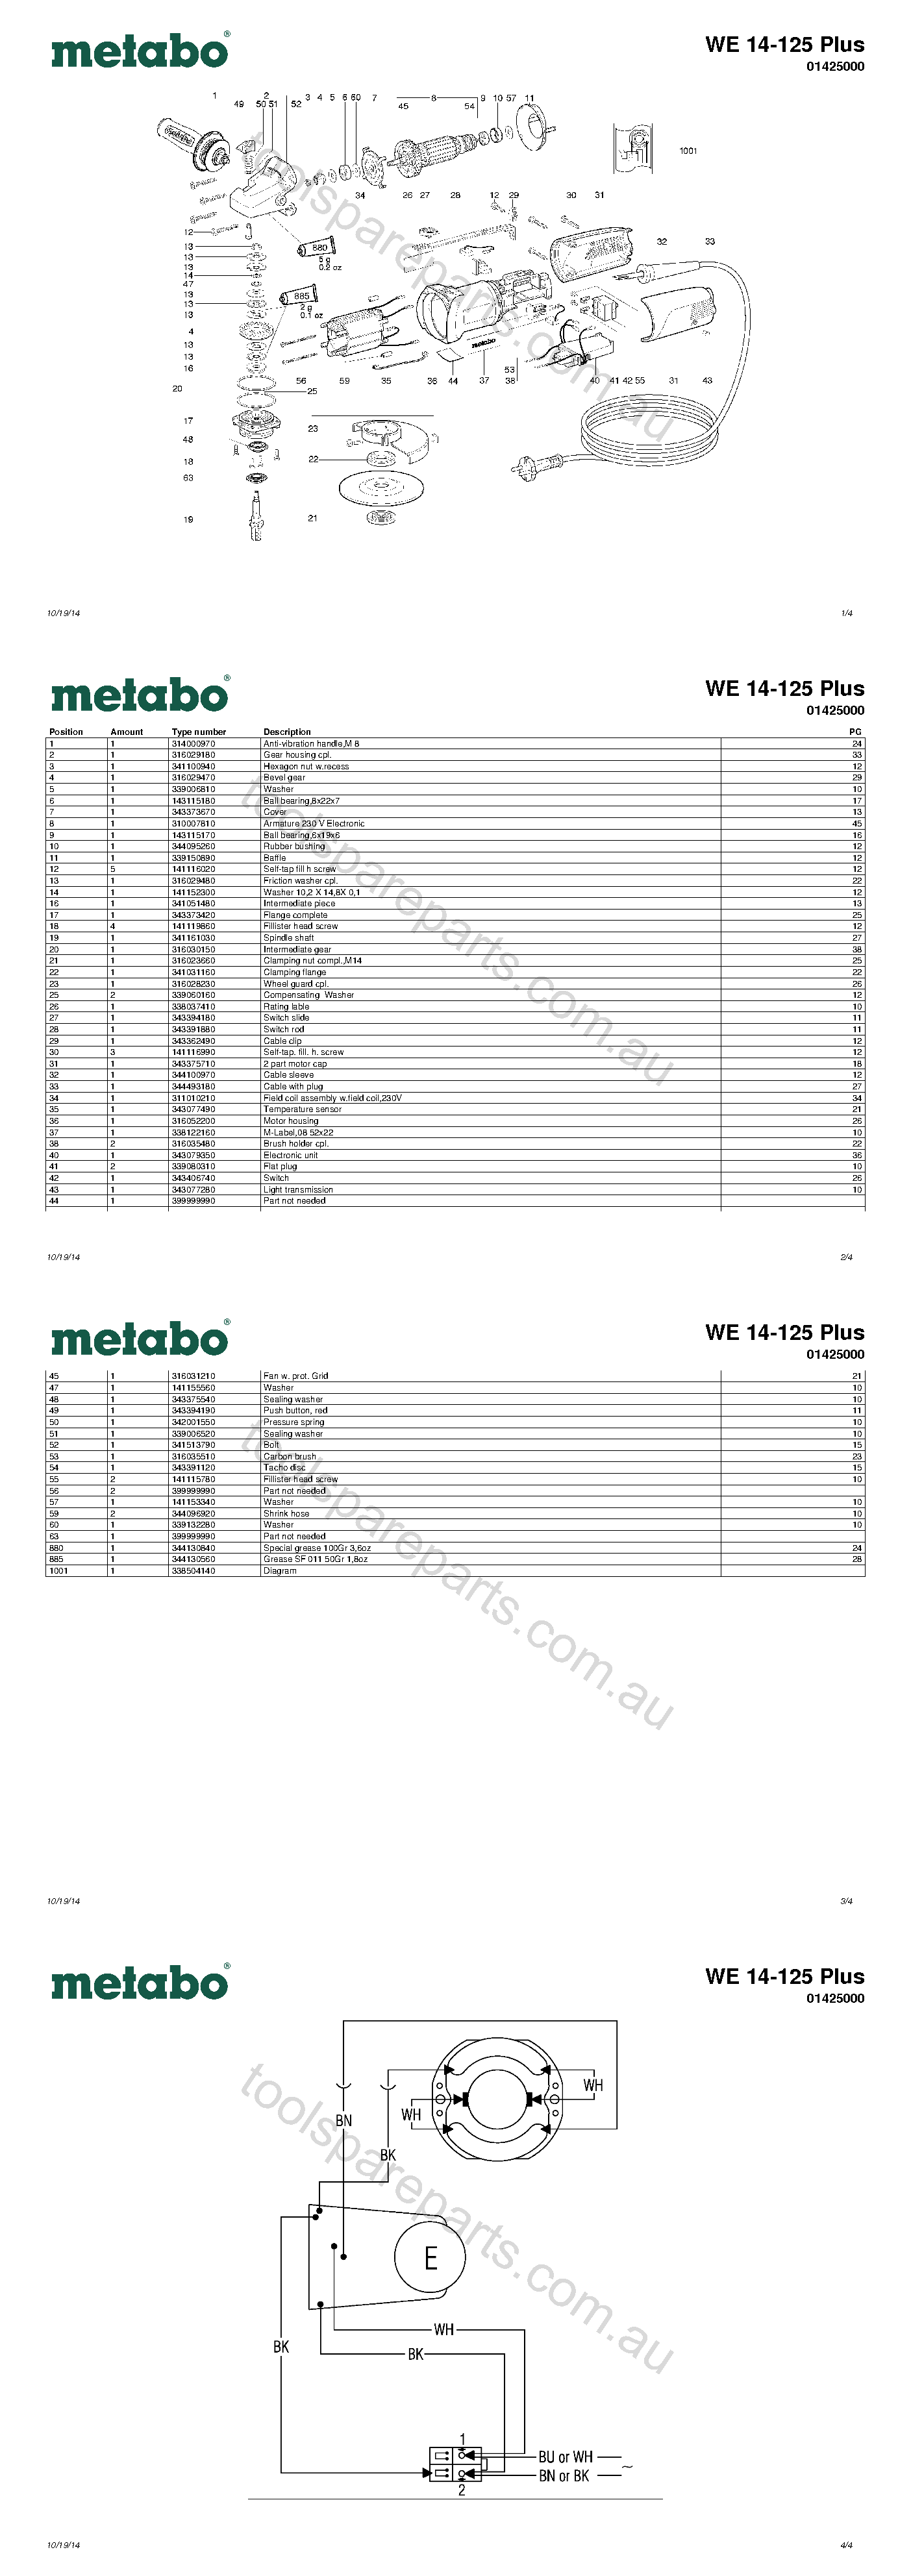 Genuine METABO CARBON BRUSHES 316046800 for W8-115 W8-125 W11-125 W11-150 WE9-125 WE14-125 WE14-150 WP8-115 WEP14-150 WE14-125 WE14-150 WEPBA14-150 Grinder T1D 